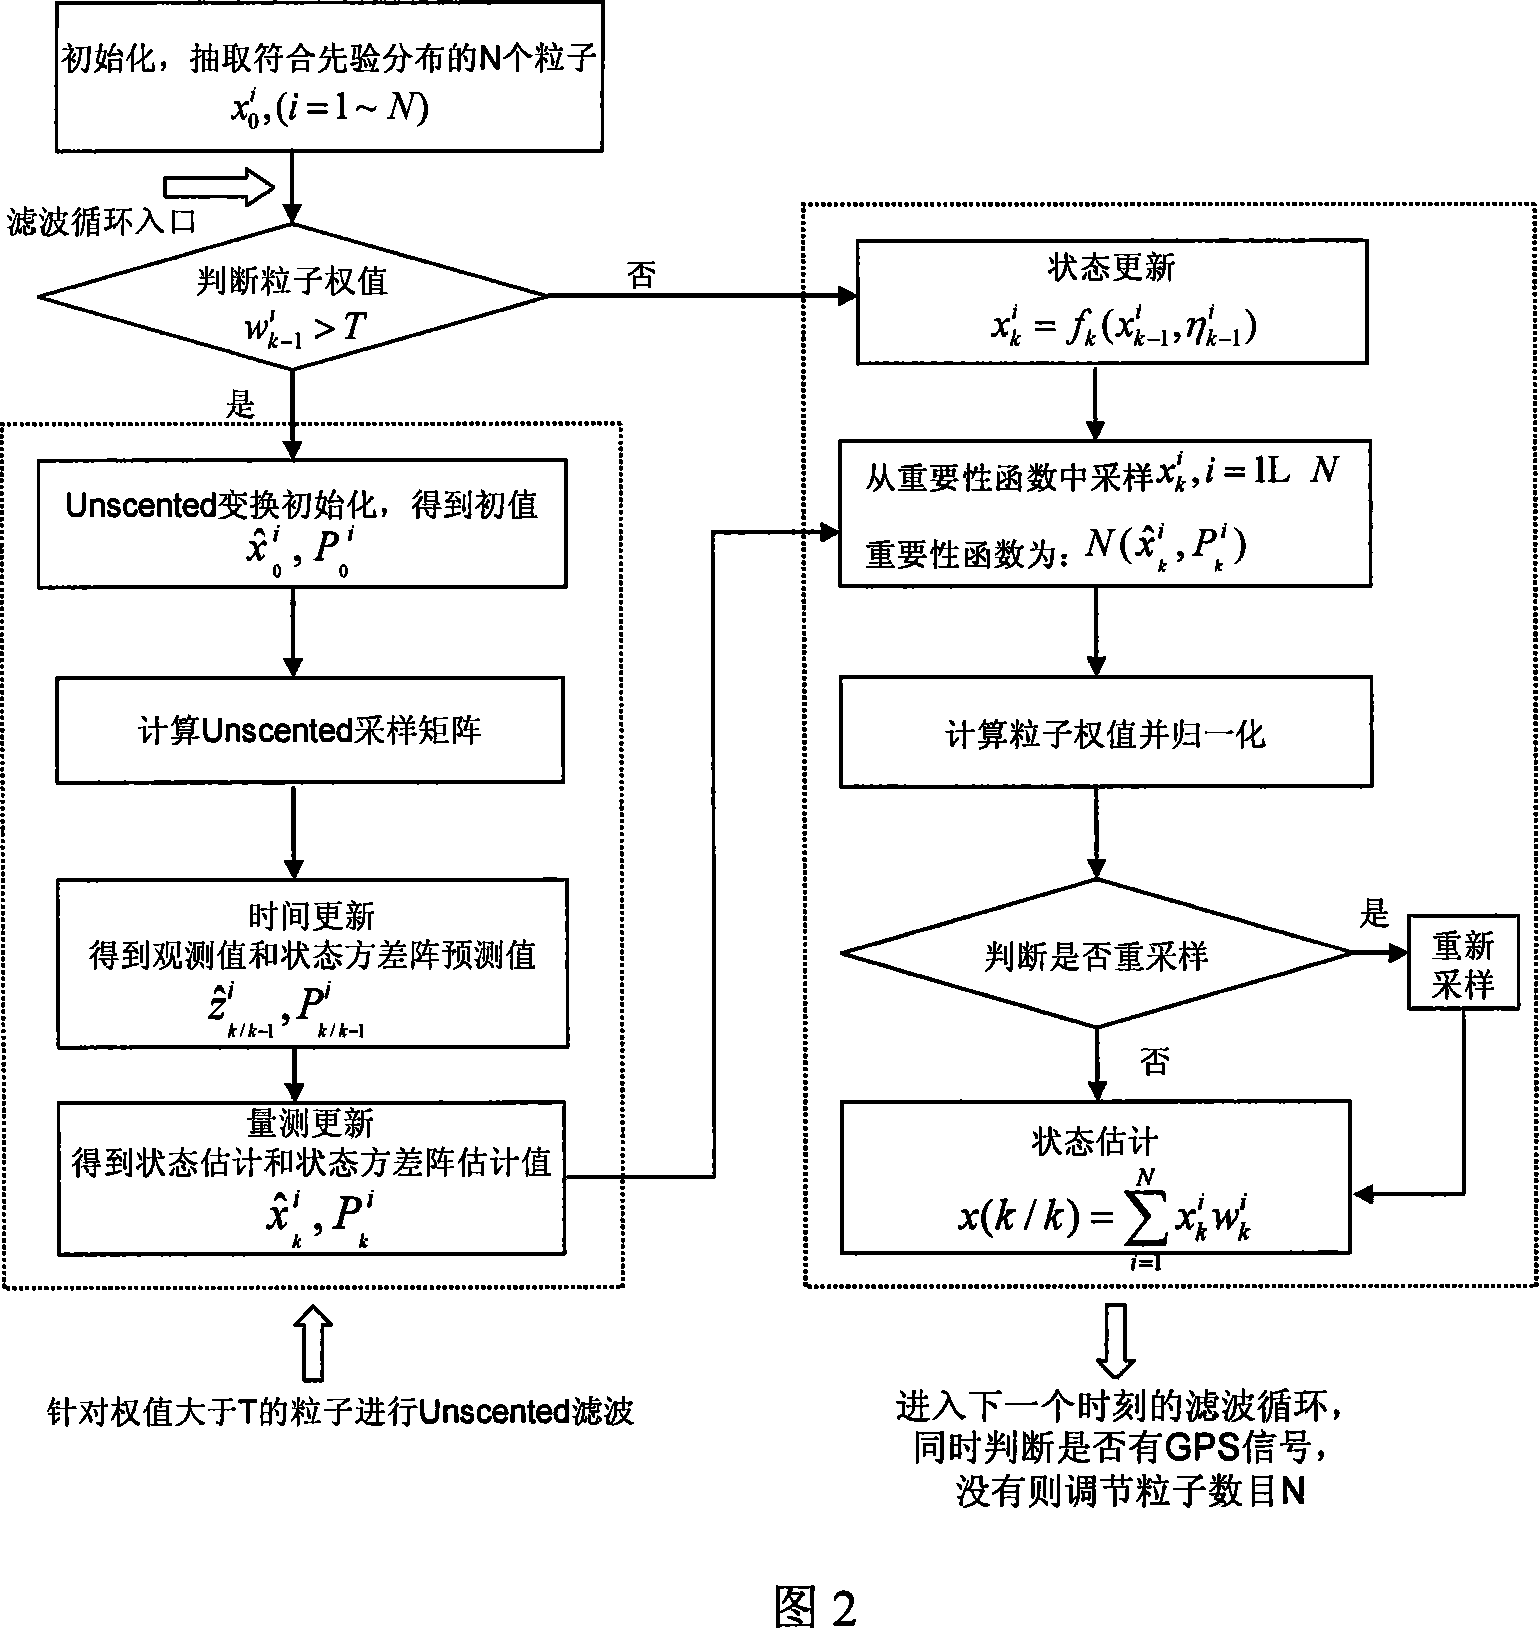 Minitype combined navigation system and self-adaptive filtering method